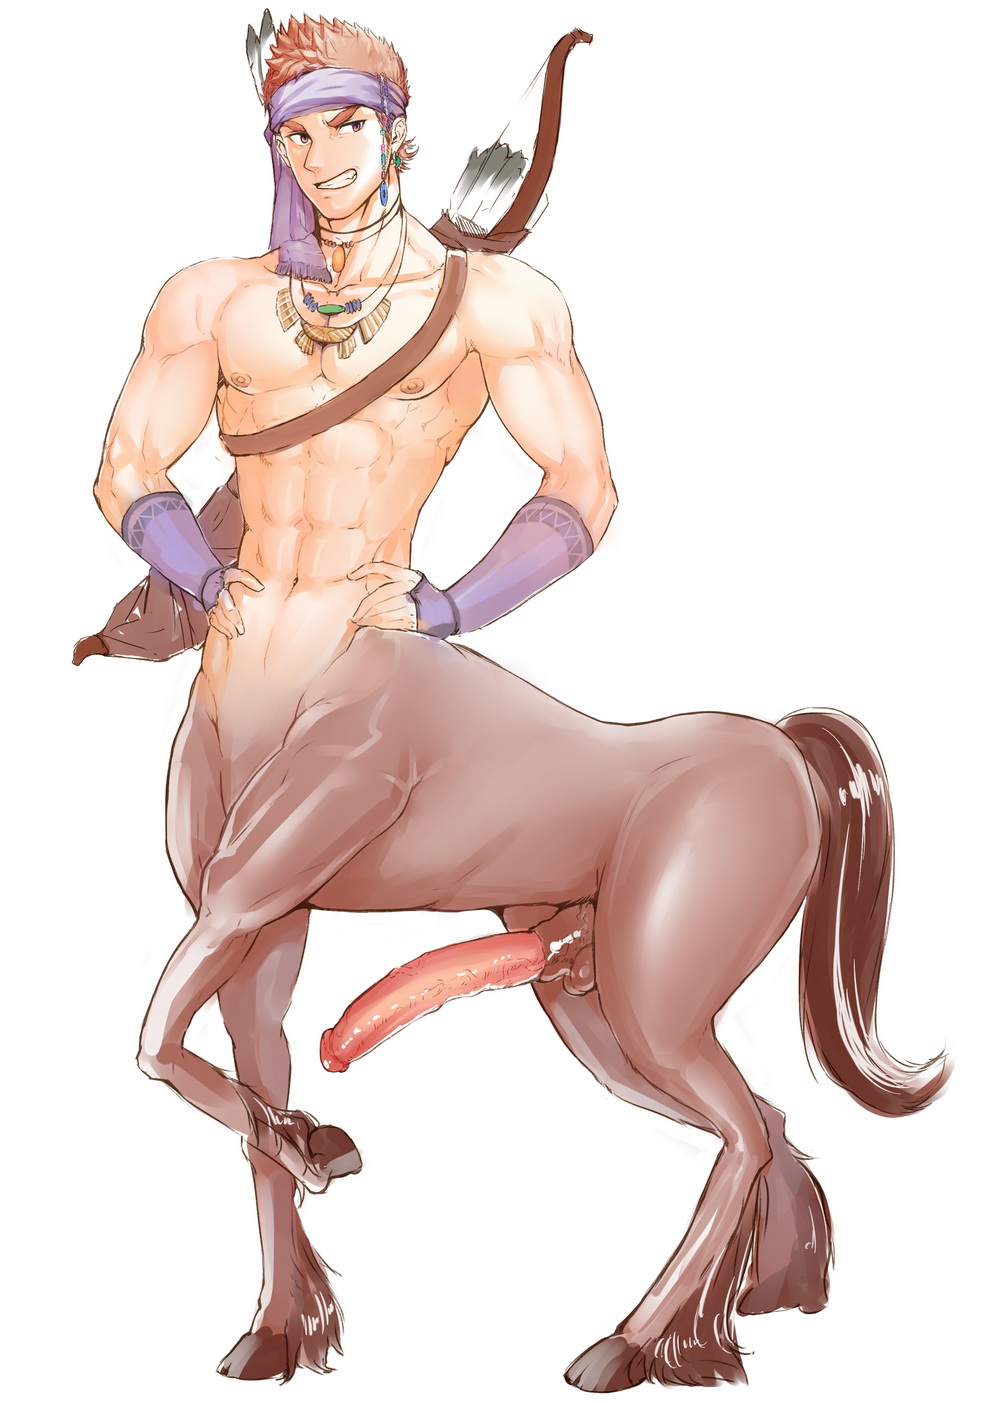 Centaurs, Satyrs, and Fauns.